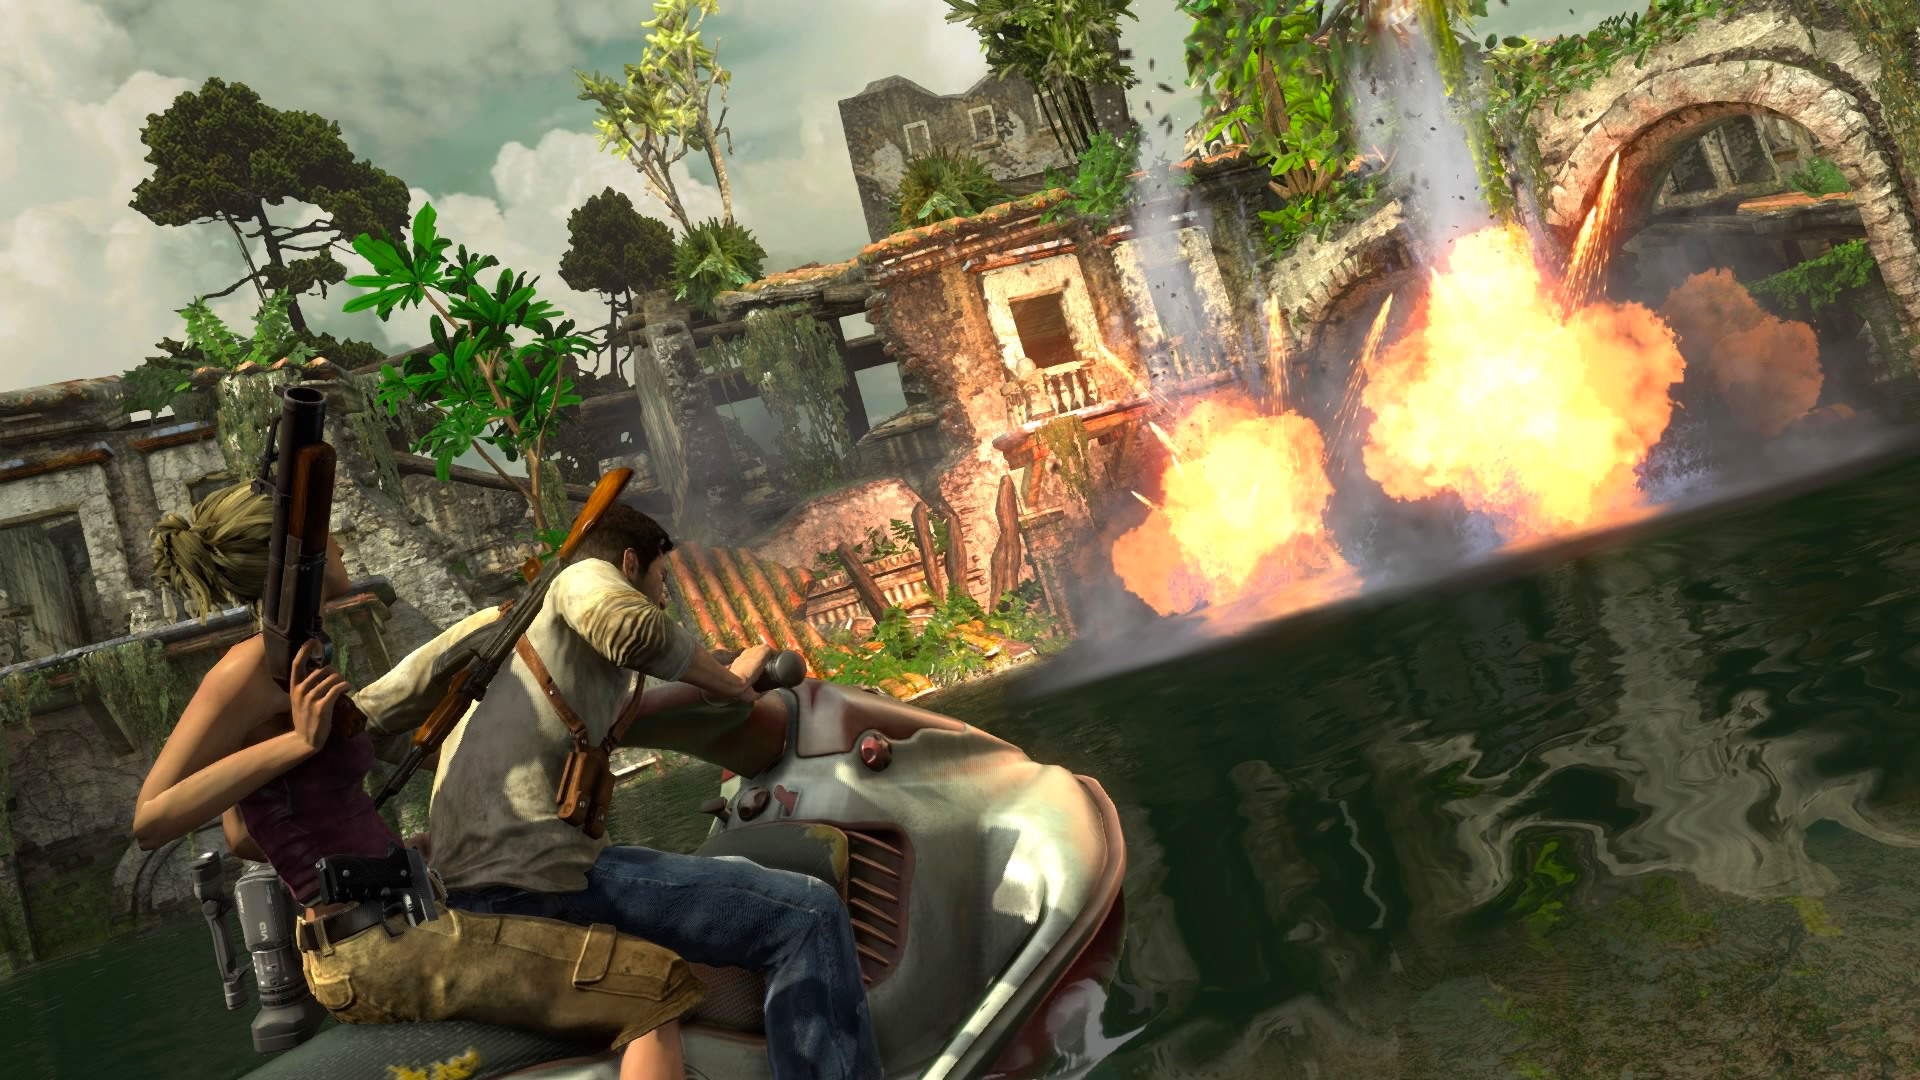 Video Game Uncharted: Drake's Fortune Wallpaper